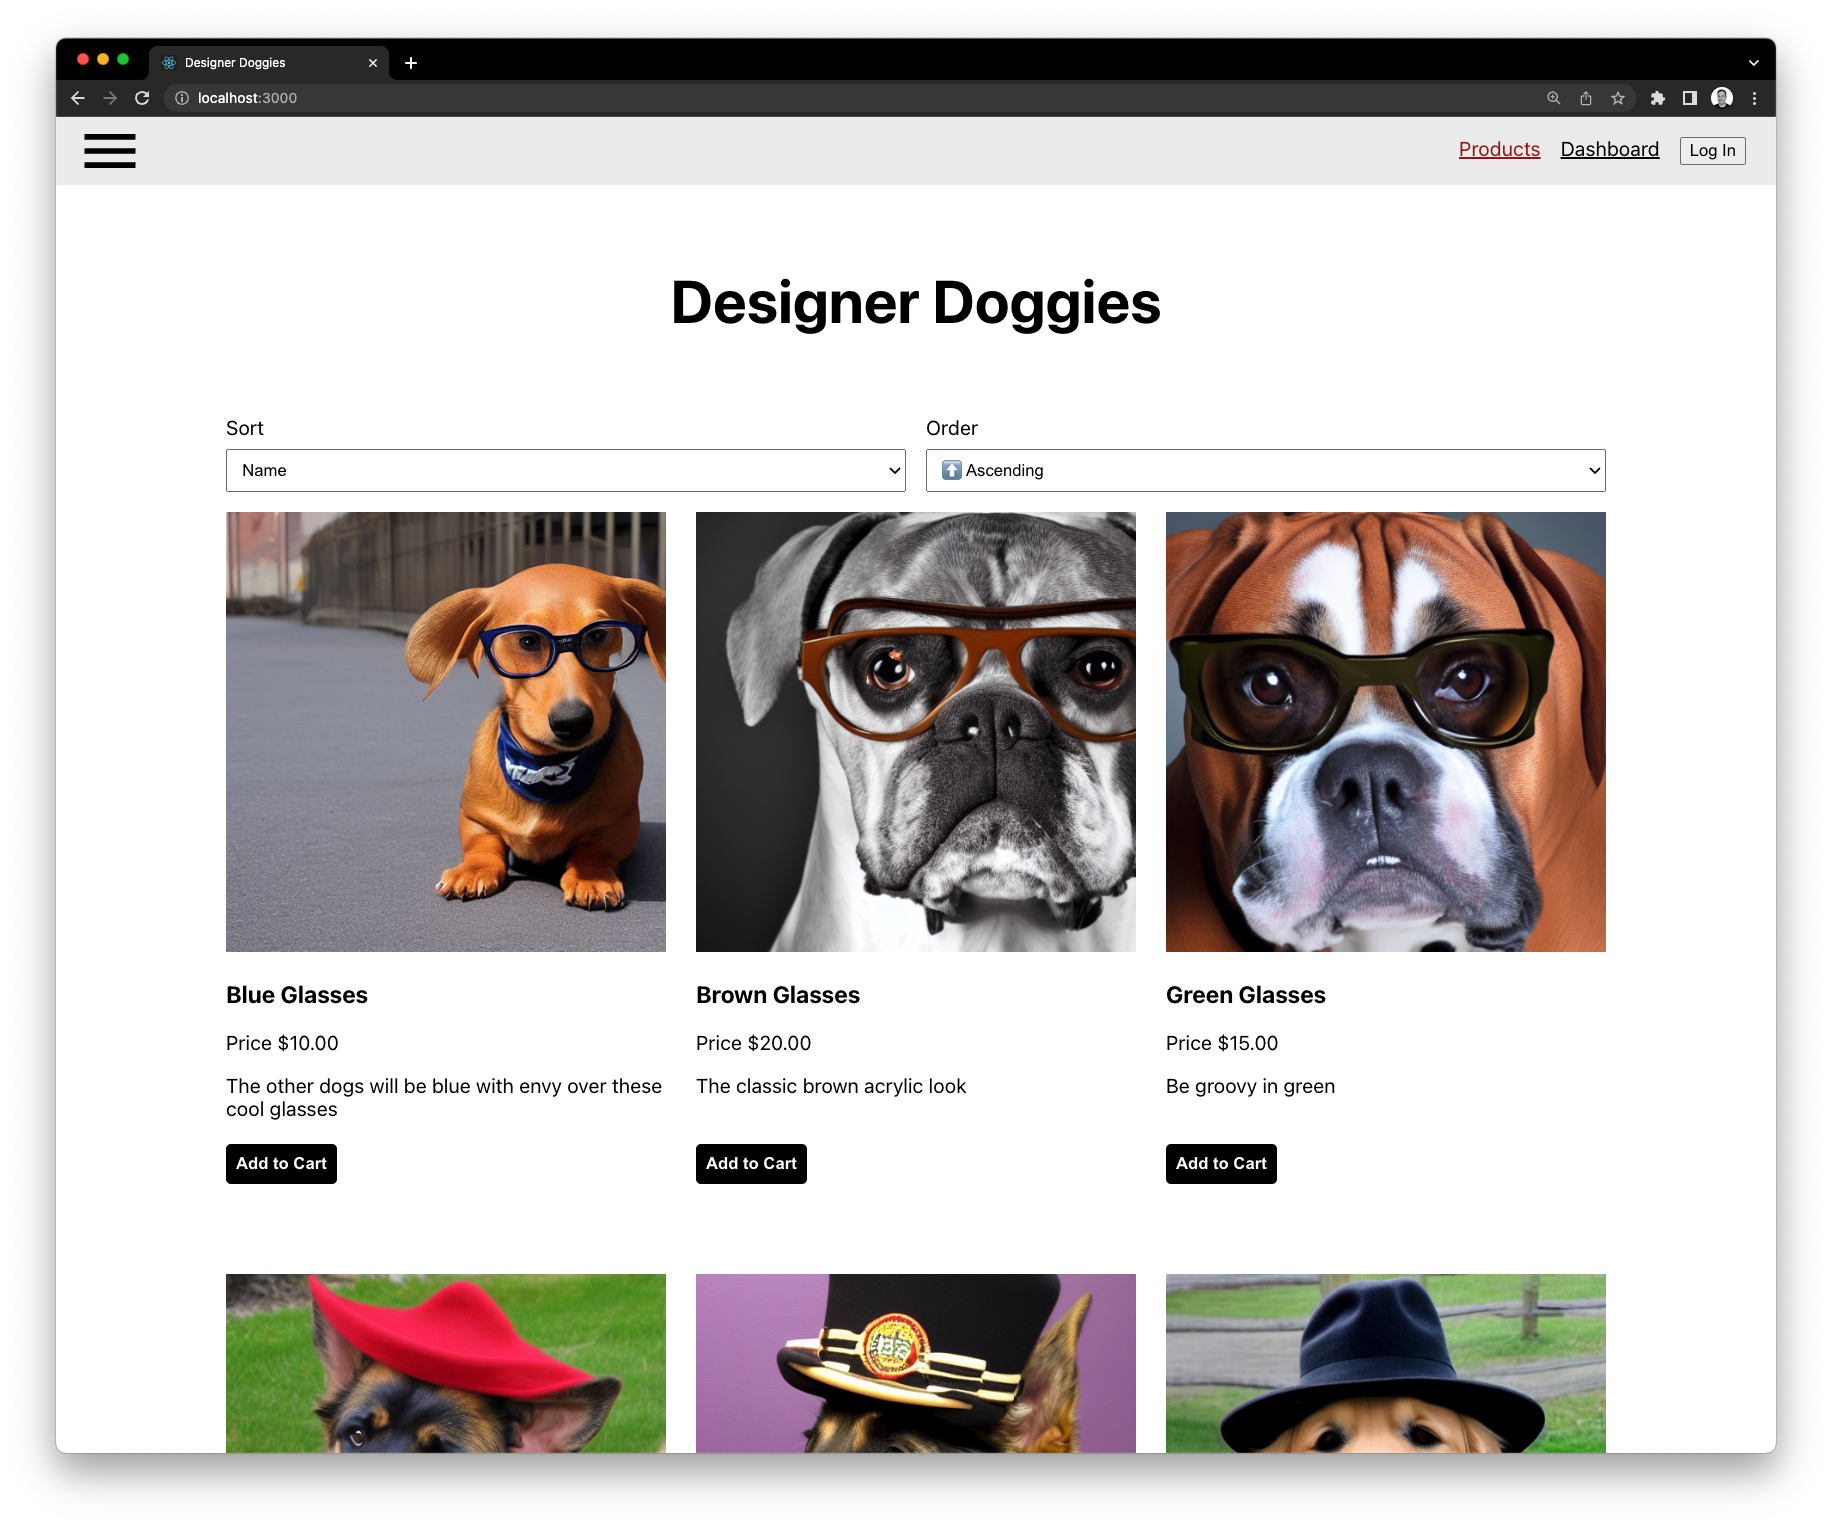 Home page of designer dogs